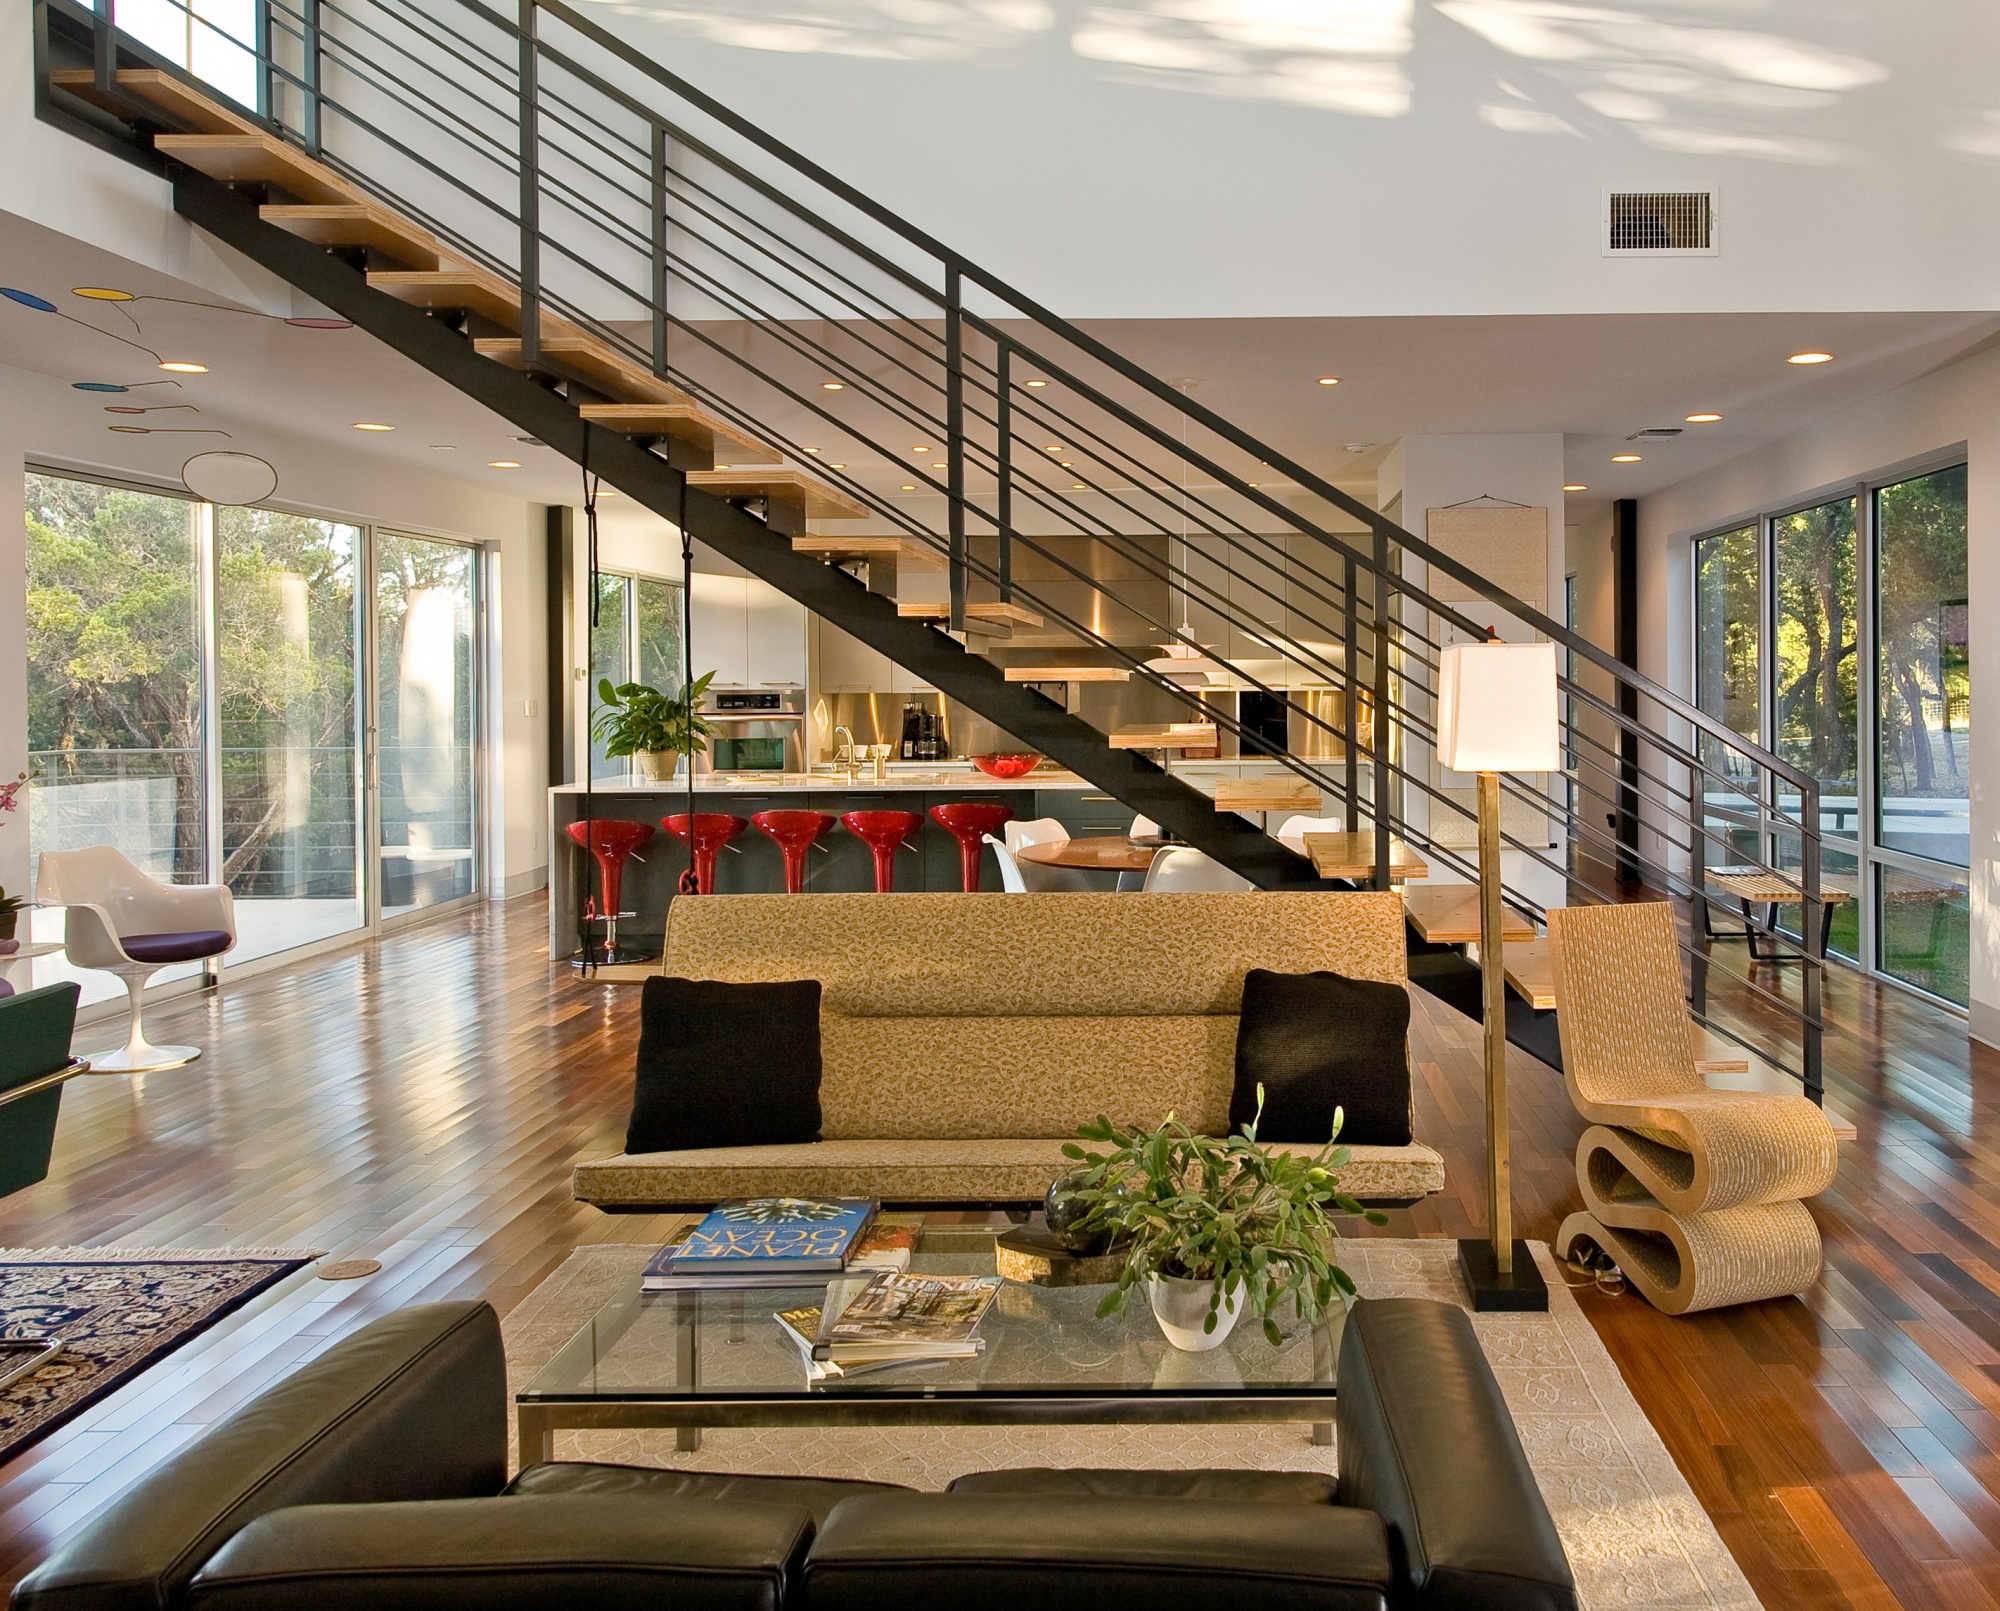 Living, dining, and kitchen are bisected with a floating steel stair system.